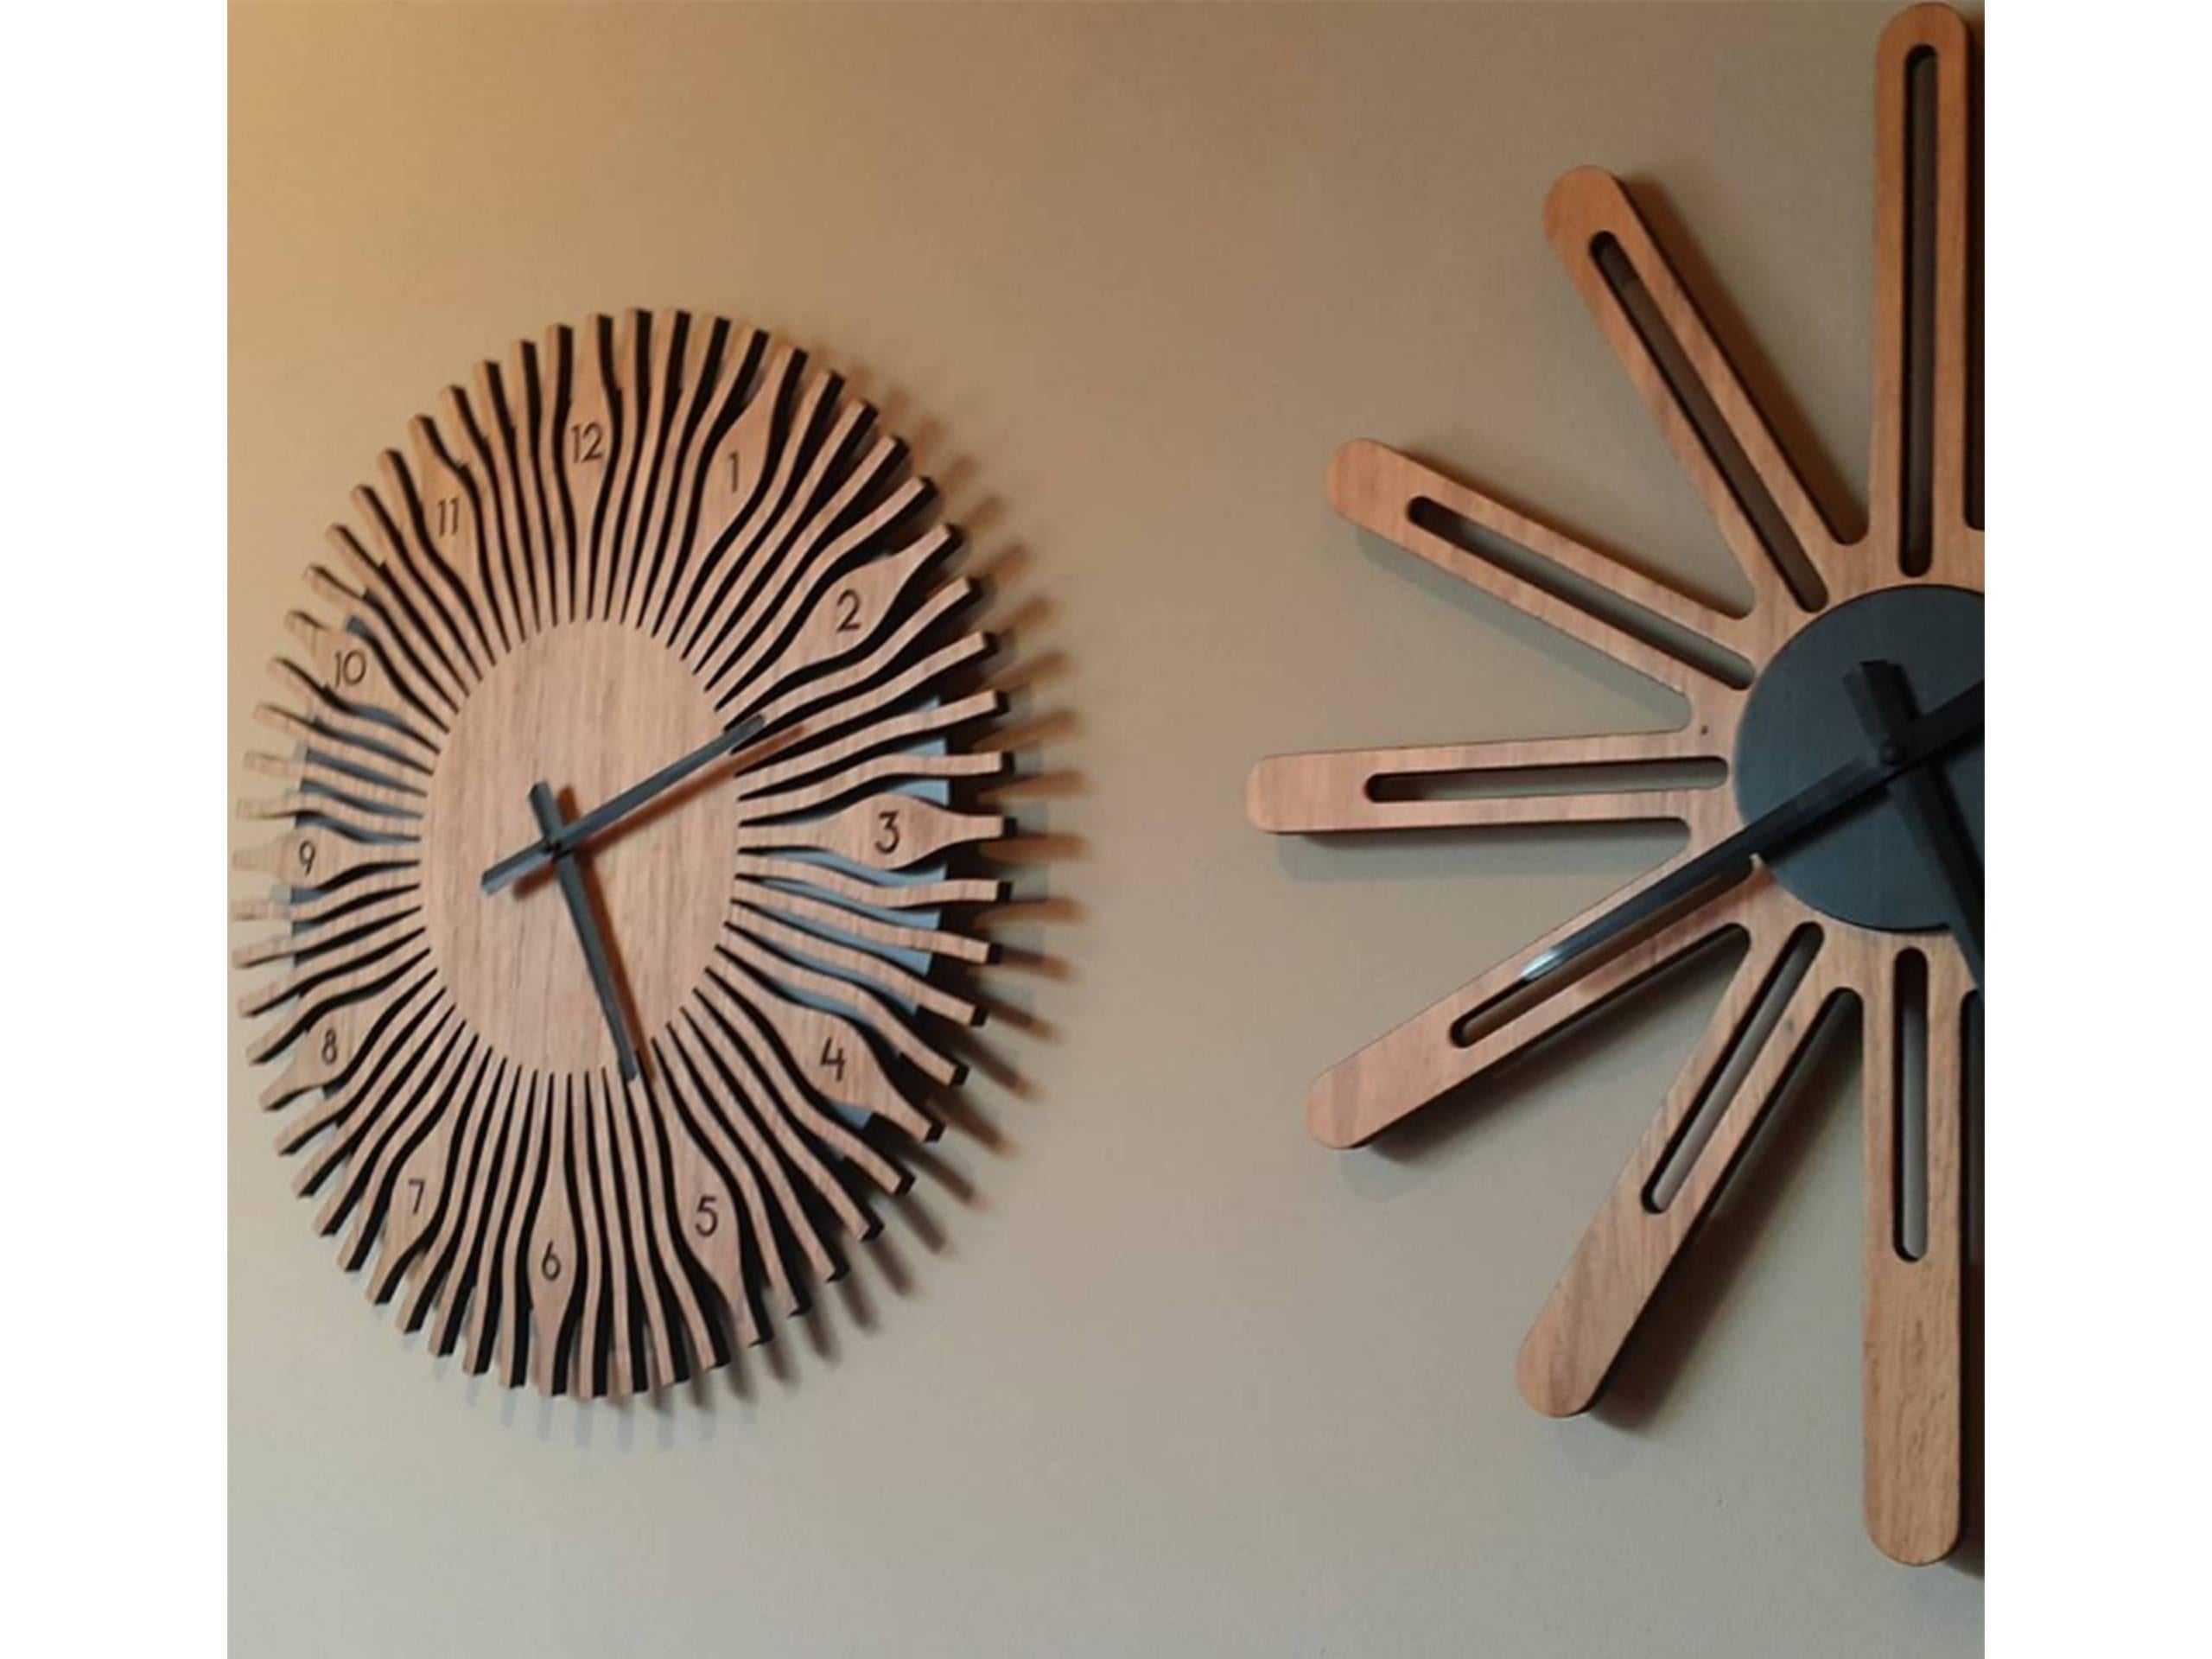 This series of wall clocks gets its inspiration from Aztec aesthetics and culture. The Aztecs were knowledgeable about time span and had calculated with precision the year’s duration, determined the solstices, the phases of the moon and located